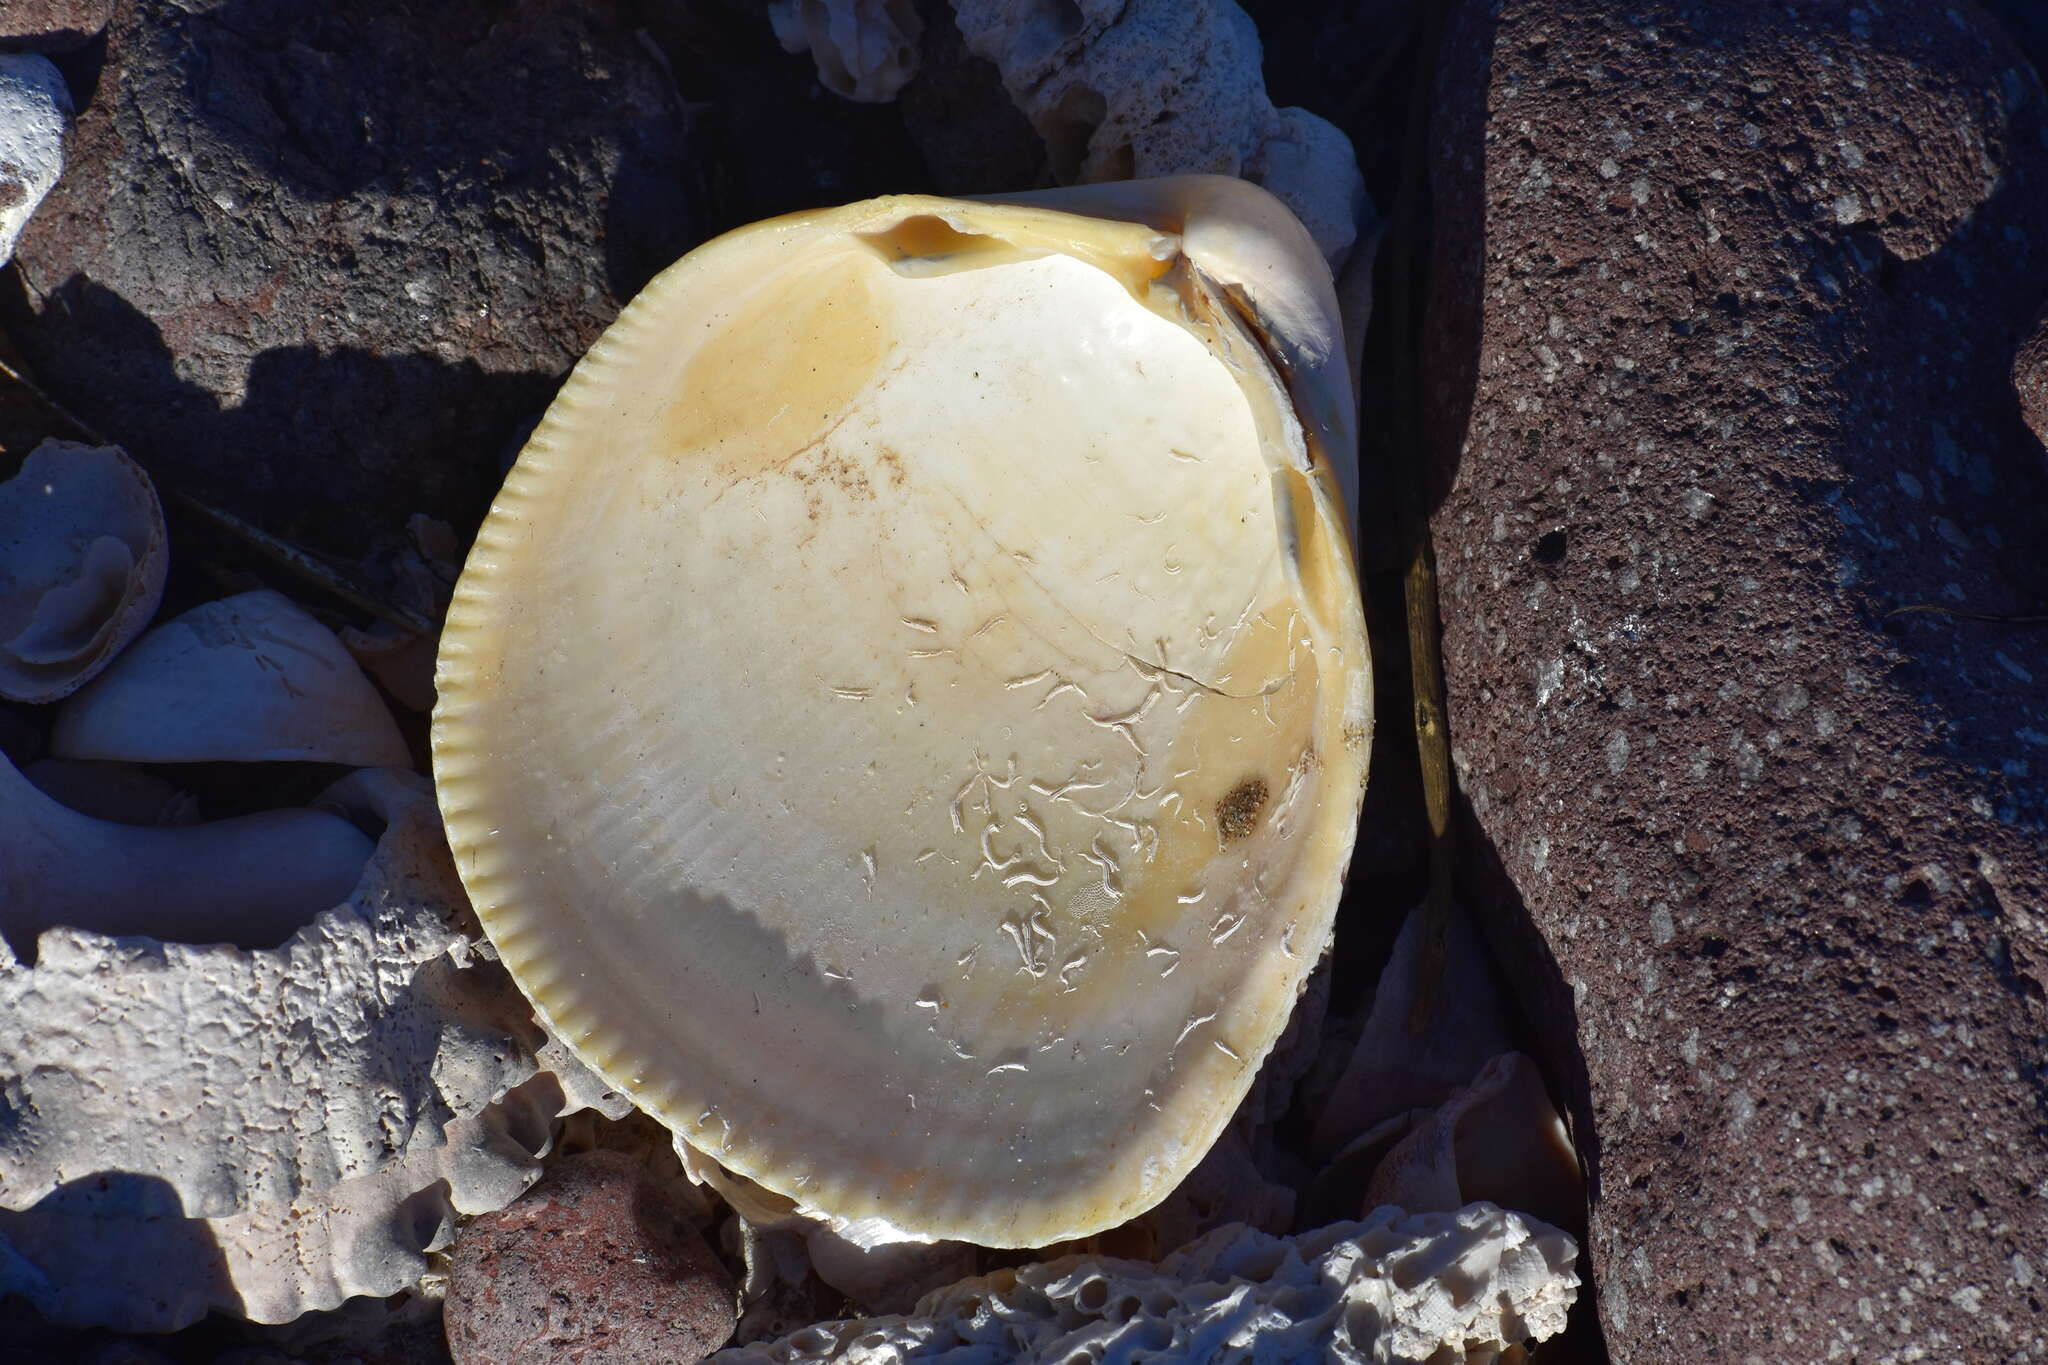 Image of giant Pacific eggcockle